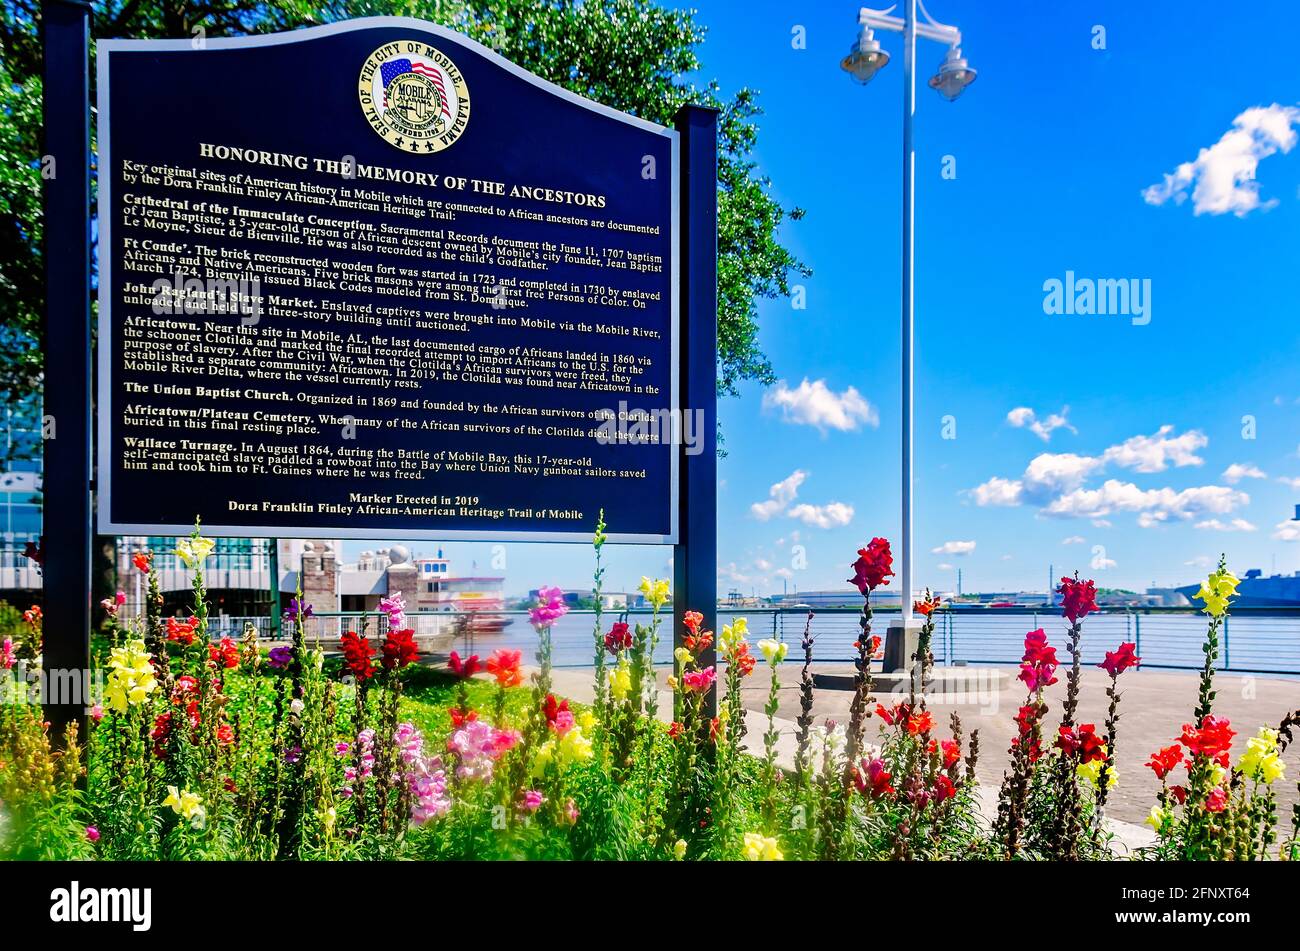 A plaque honors African ancestors at Cooper Riverside Park, May 14, 2021, in Mobile, Alabama. Stock Photo